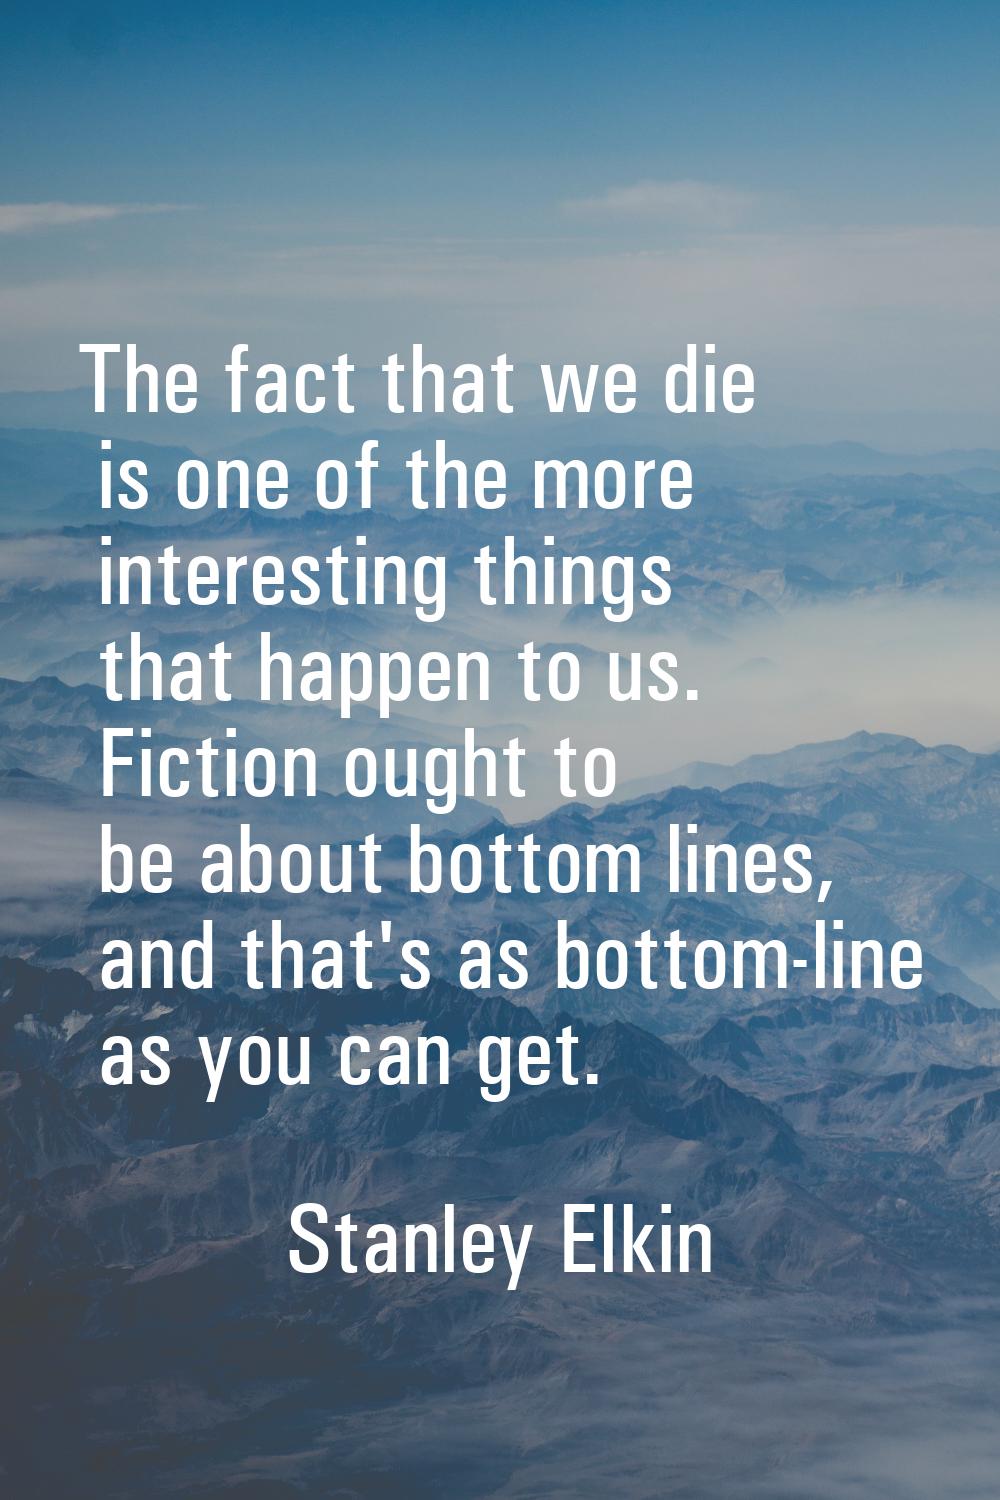 The fact that we die is one of the more interesting things that happen to us. Fiction ought to be a